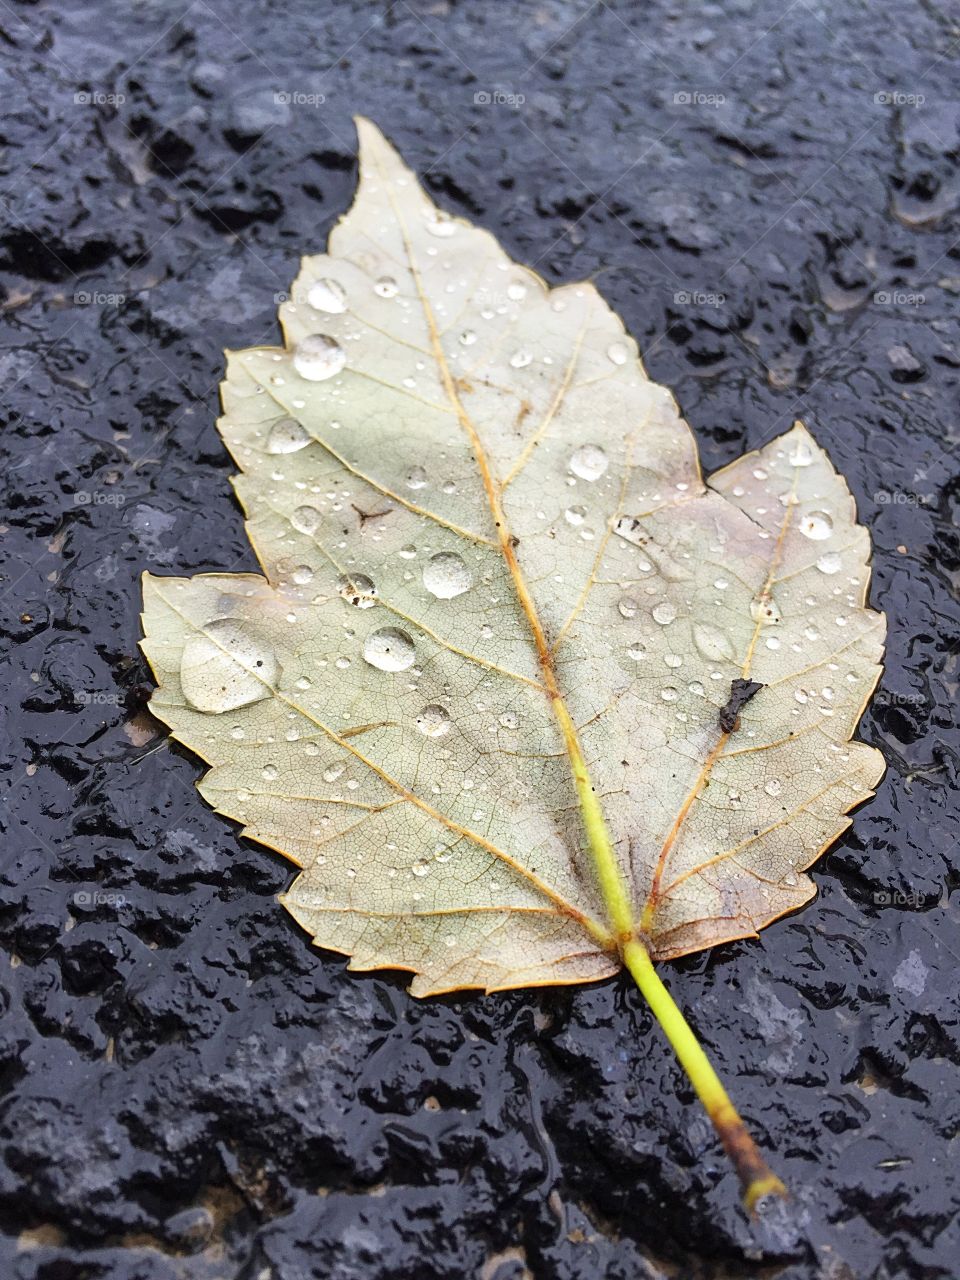 Beautiful water droplets collected on the back of a fallen leaf.